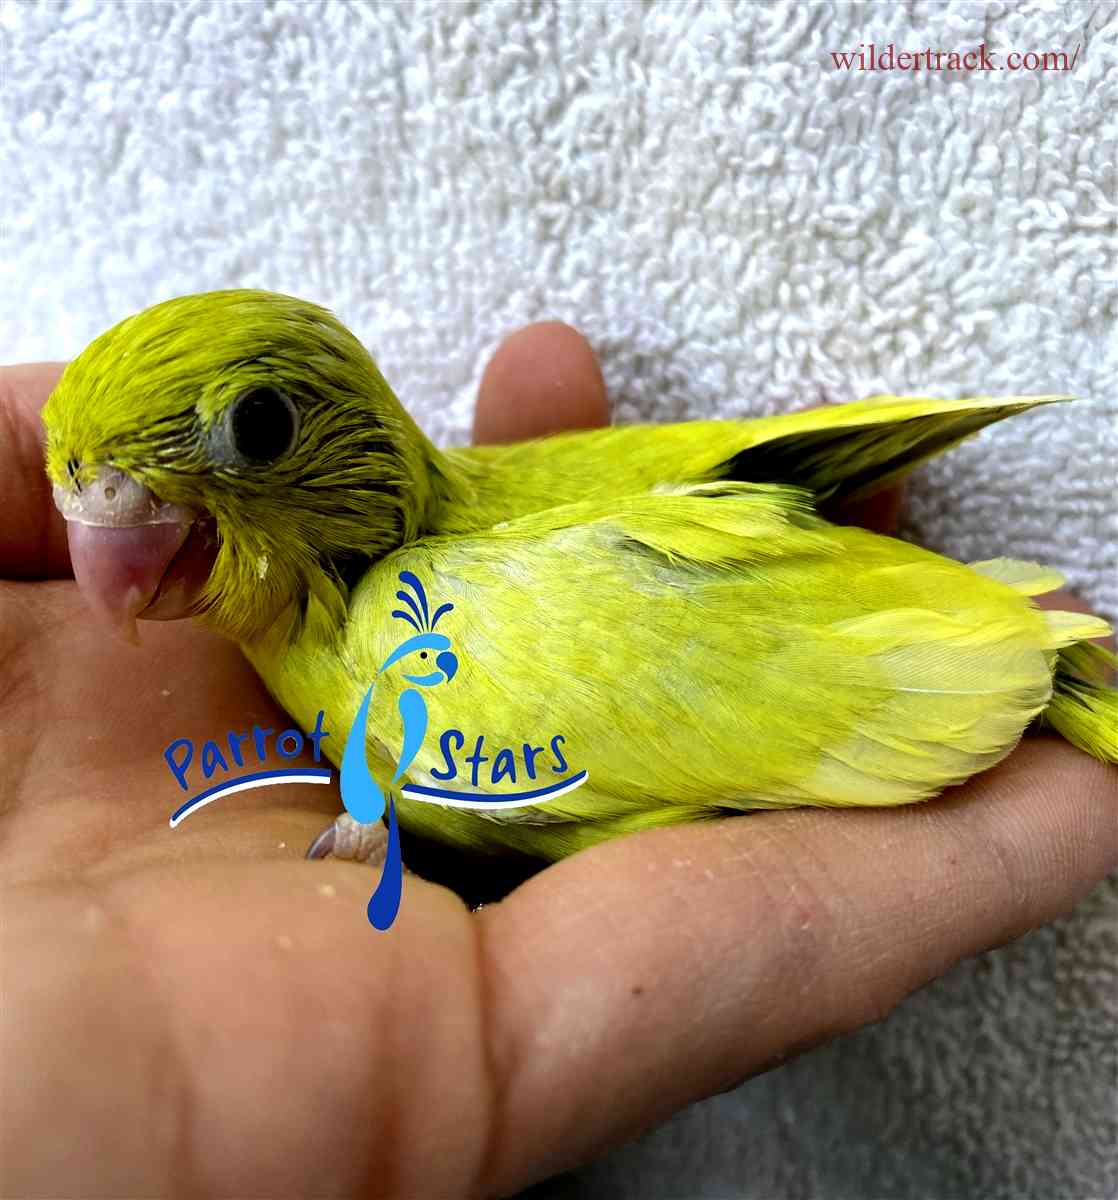 What are parrotlets?